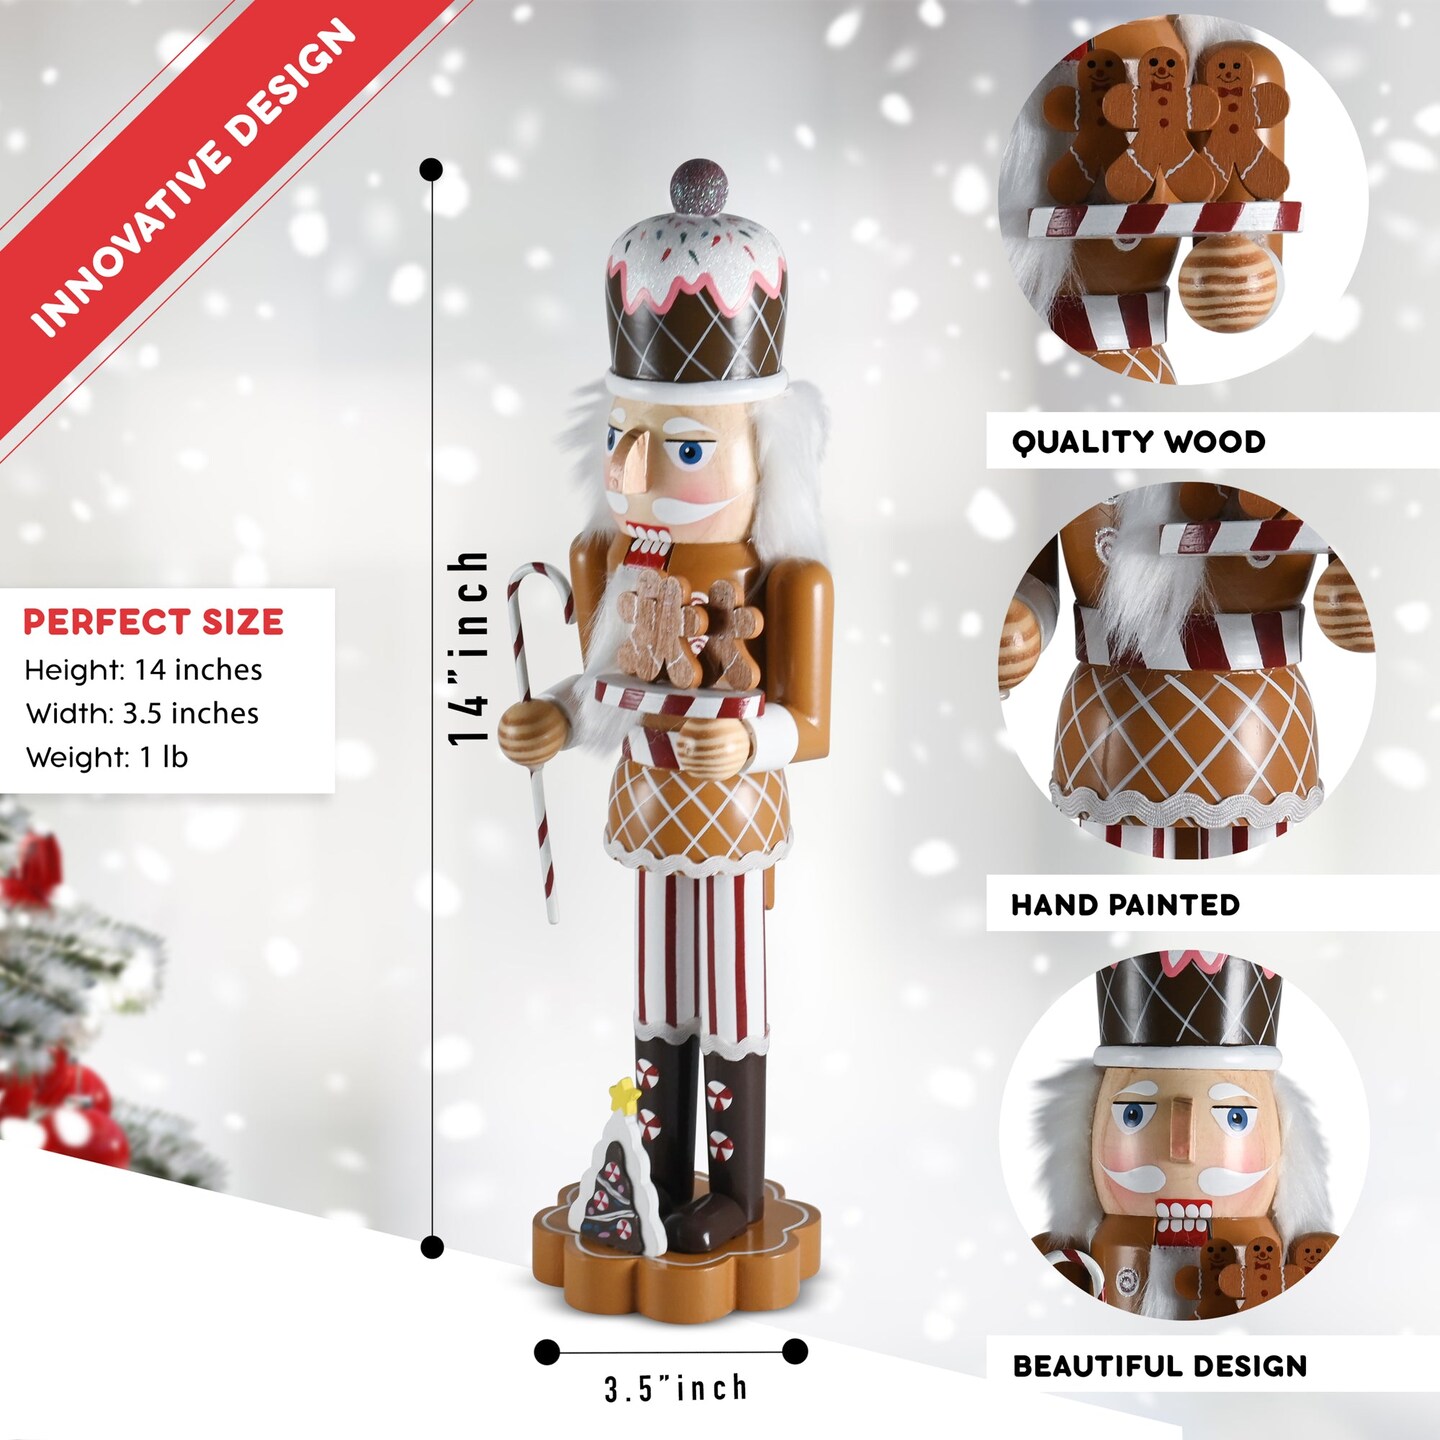 Ornativity Christmas Candyland Gingerbread Nutcracker &#x2013; Wooden Nutcracker Candy Man with Candy Cane and Gingerbread Cookies in Hand Xmas Themed Holiday Nut Cracker Doll Figure Decorations